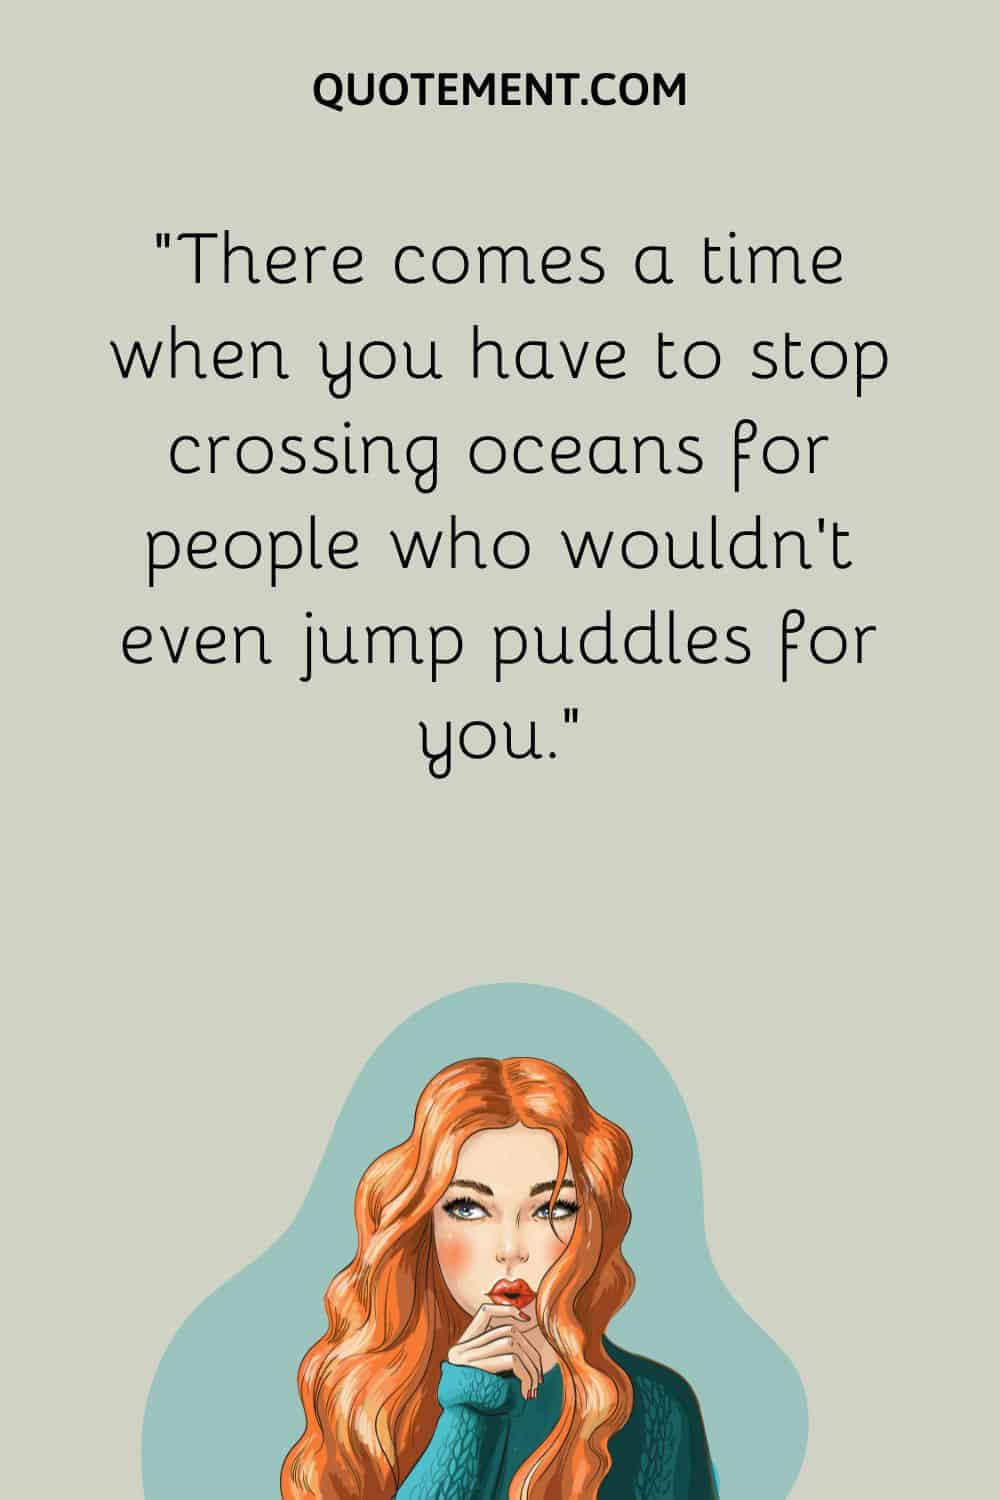 There comes a time when you have to stop crossing oceans for people who wouldn’t even jump puddles for you